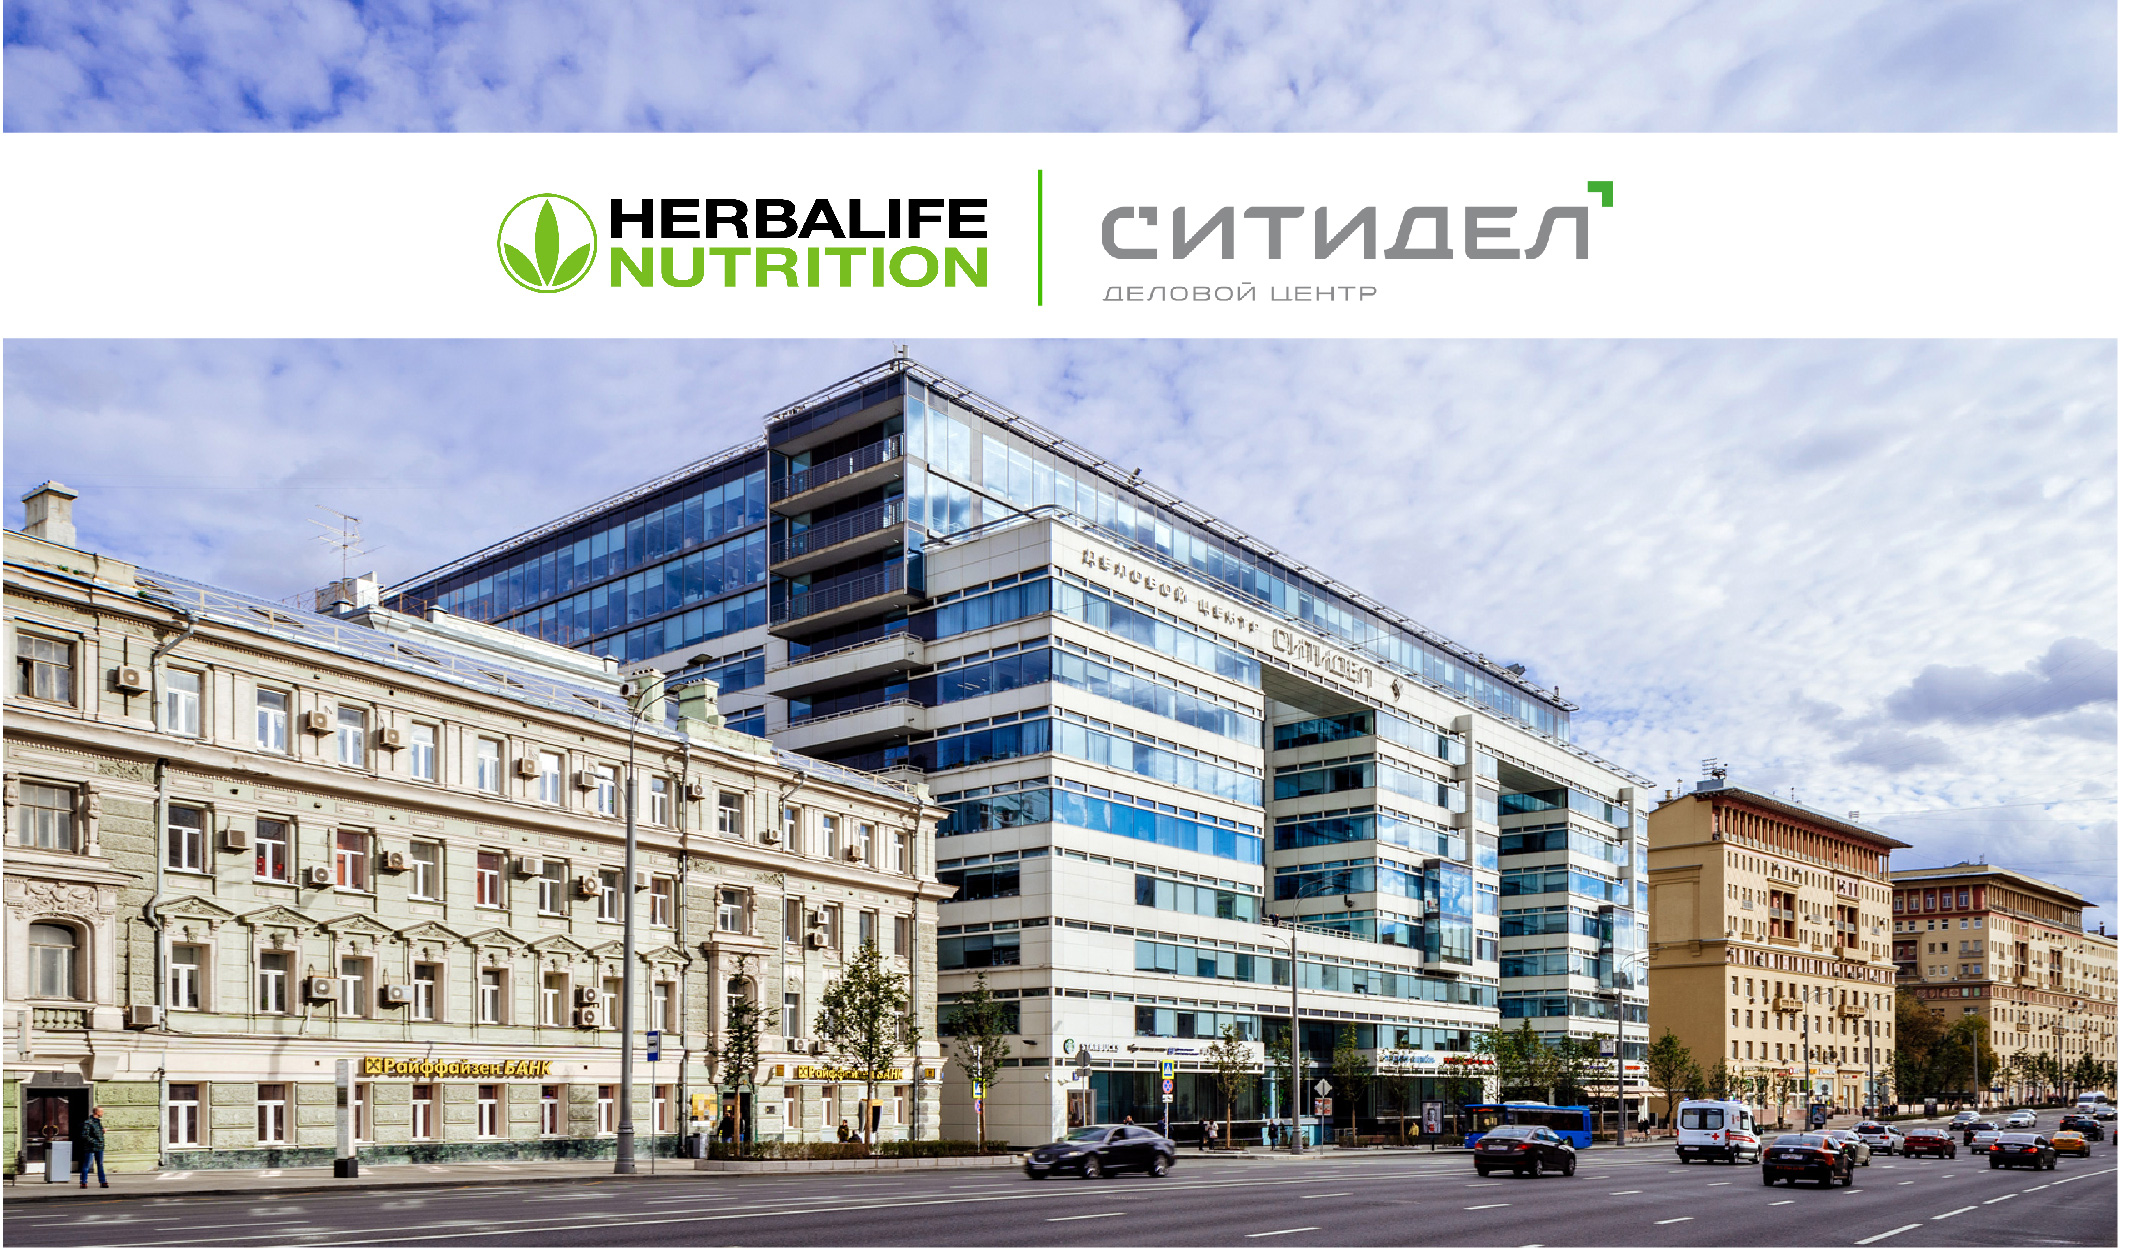 Herbalife Nutrition Renews the Lease Agreement for Office Properties in Citydel Business Centre